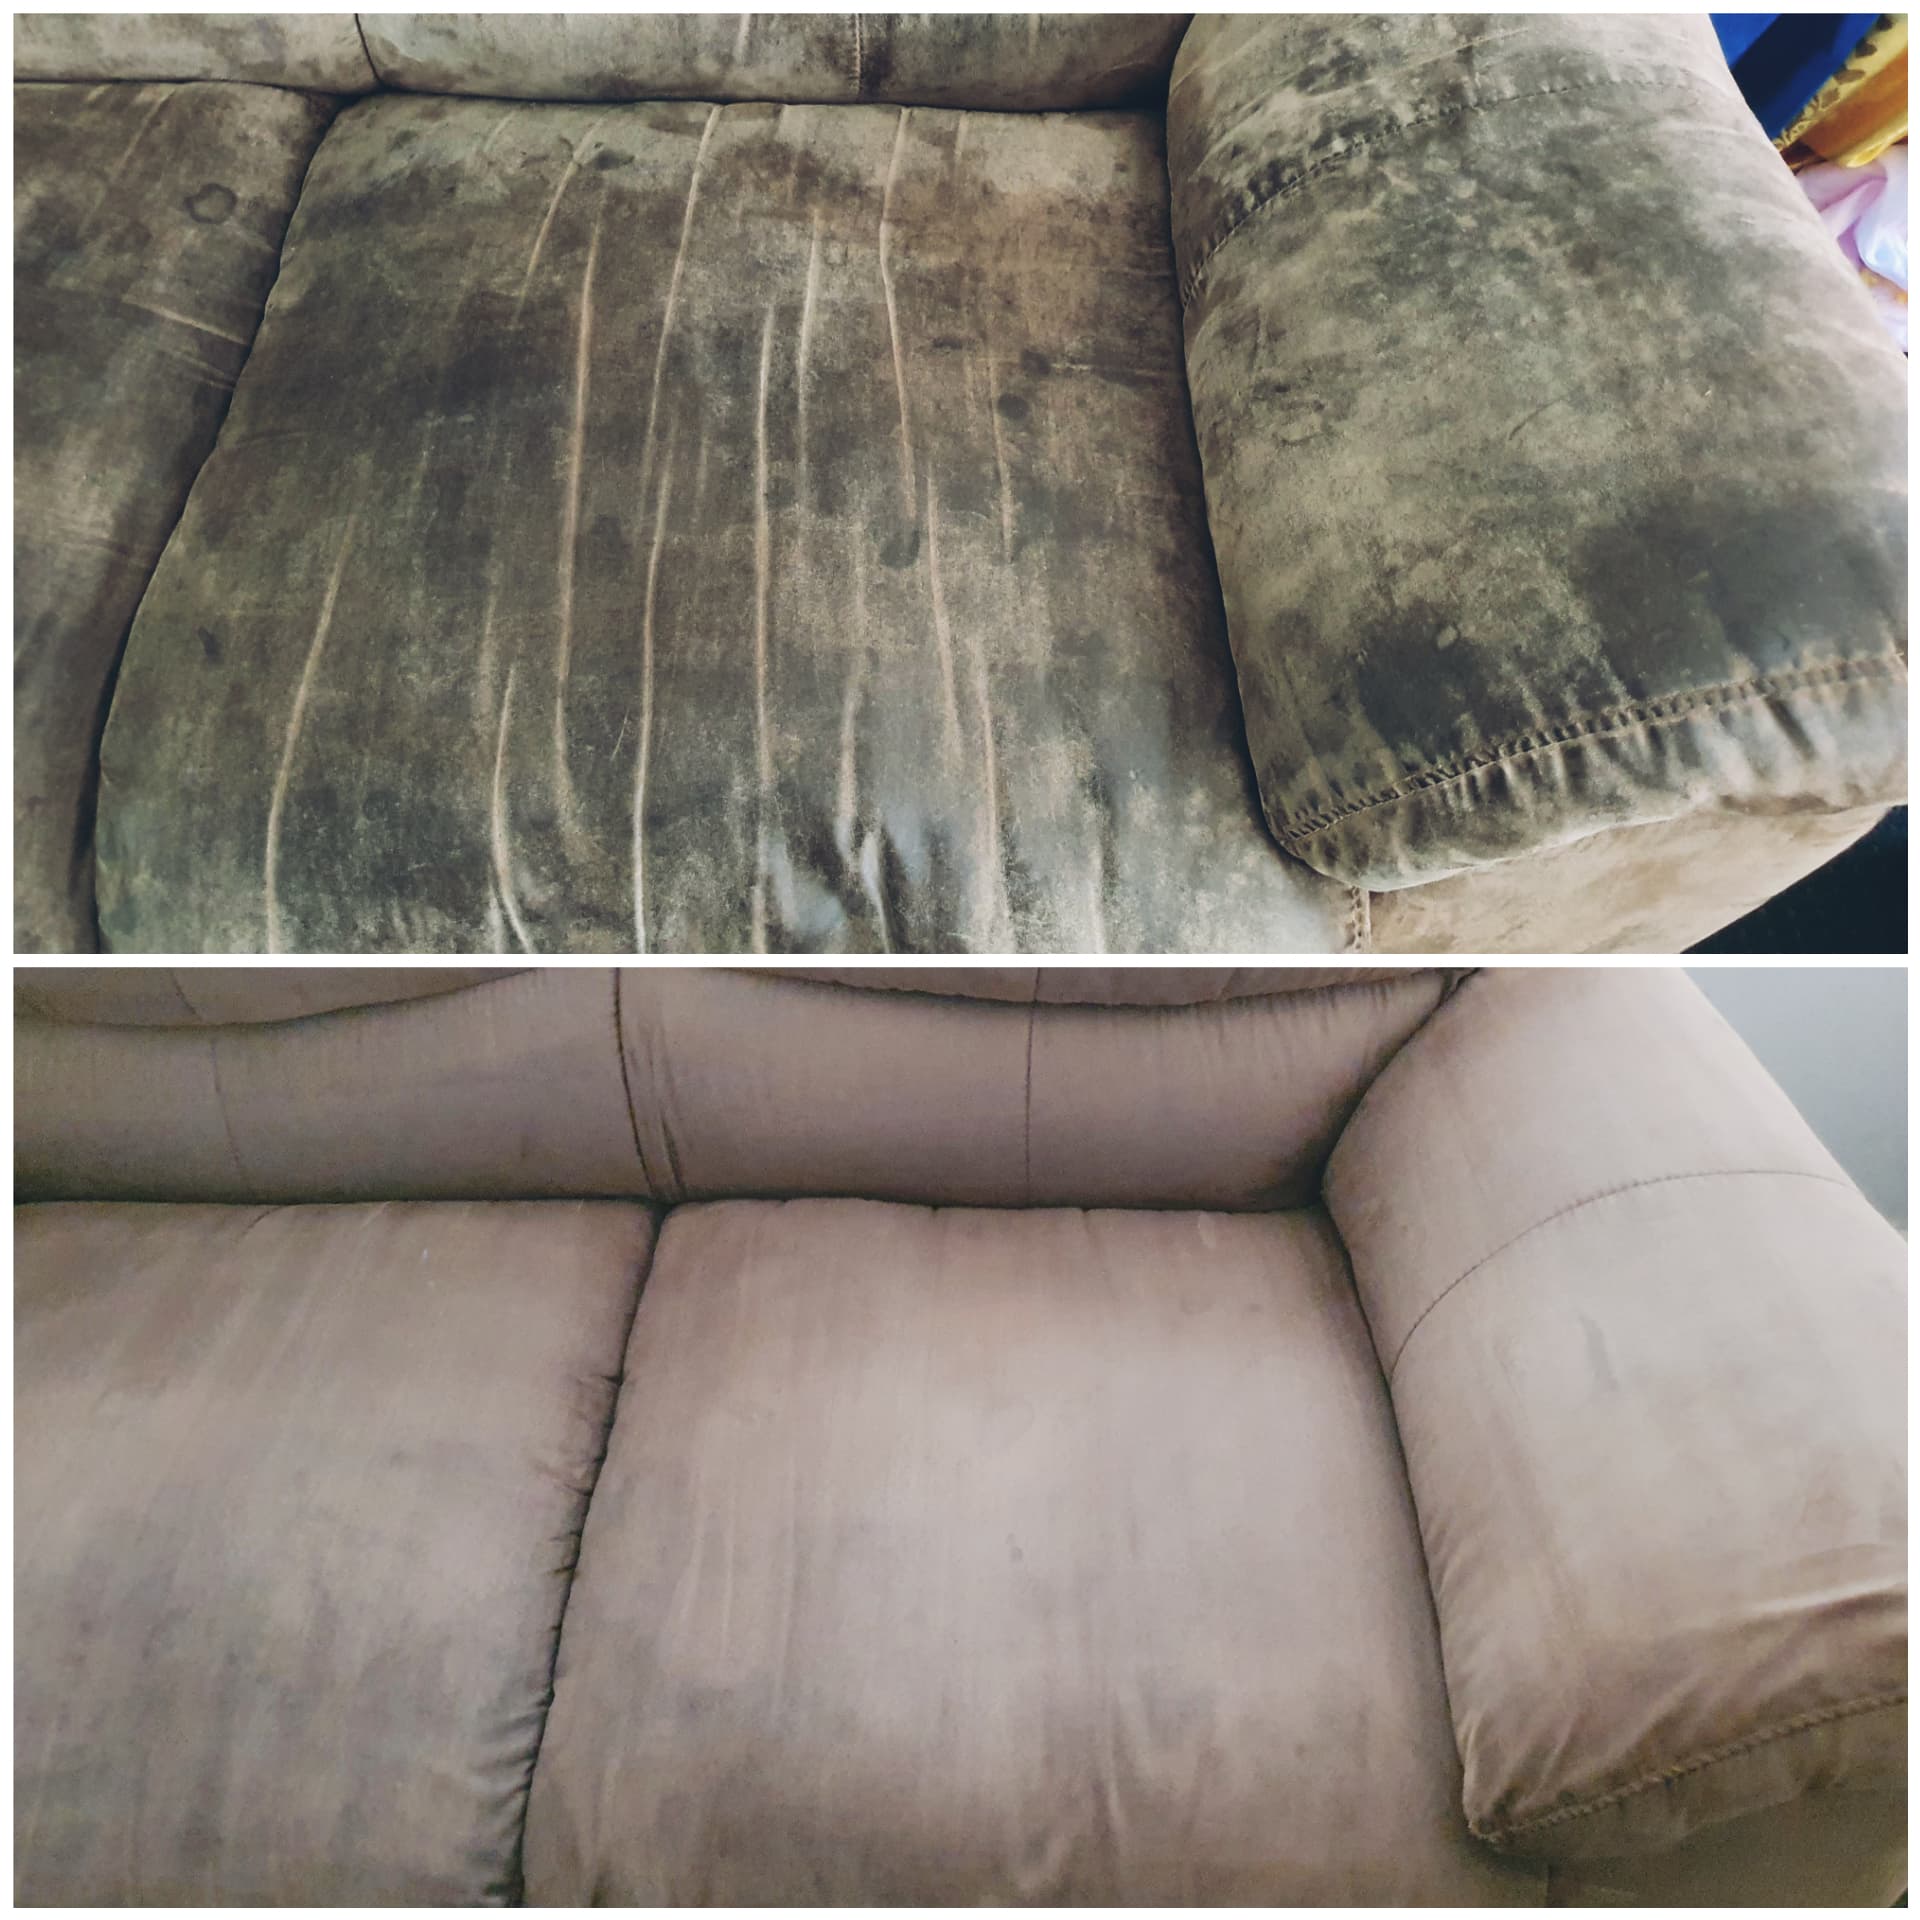 Couch Cleaning Before And After — Carpet Cleaning in Maitland, NSW